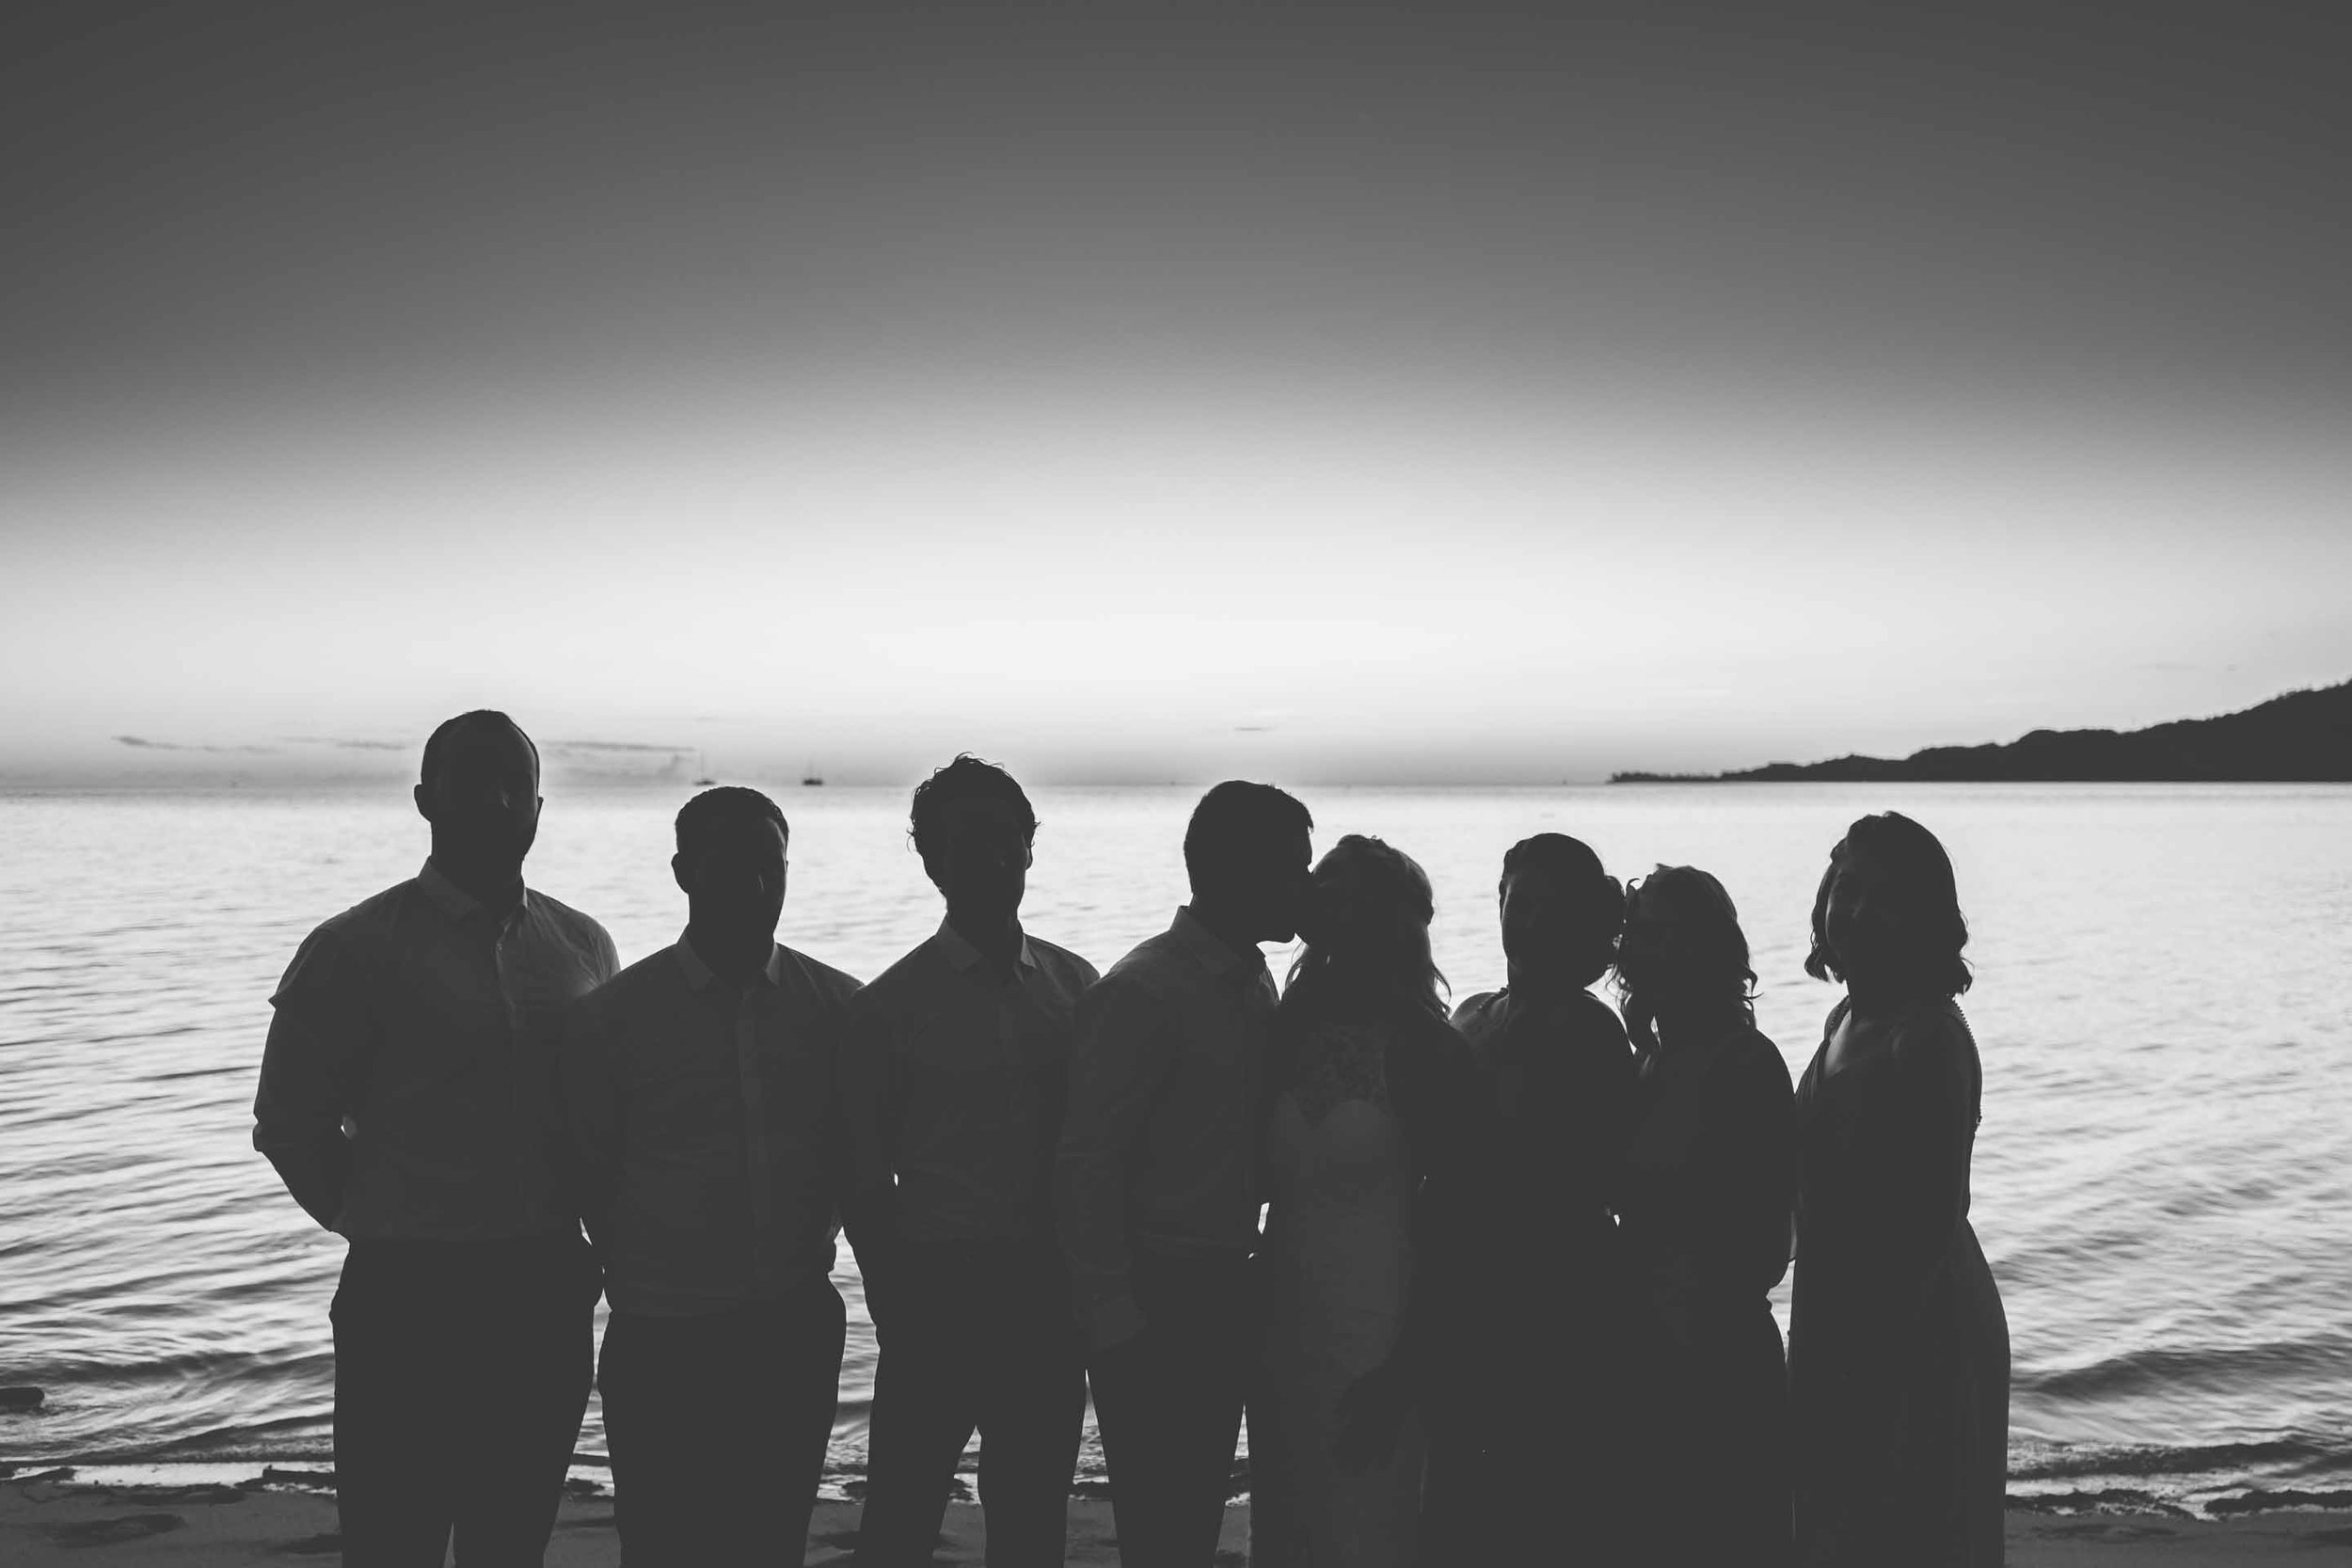 the bridal party silhouetted against the calm warm seas just after the sun has set in black and white